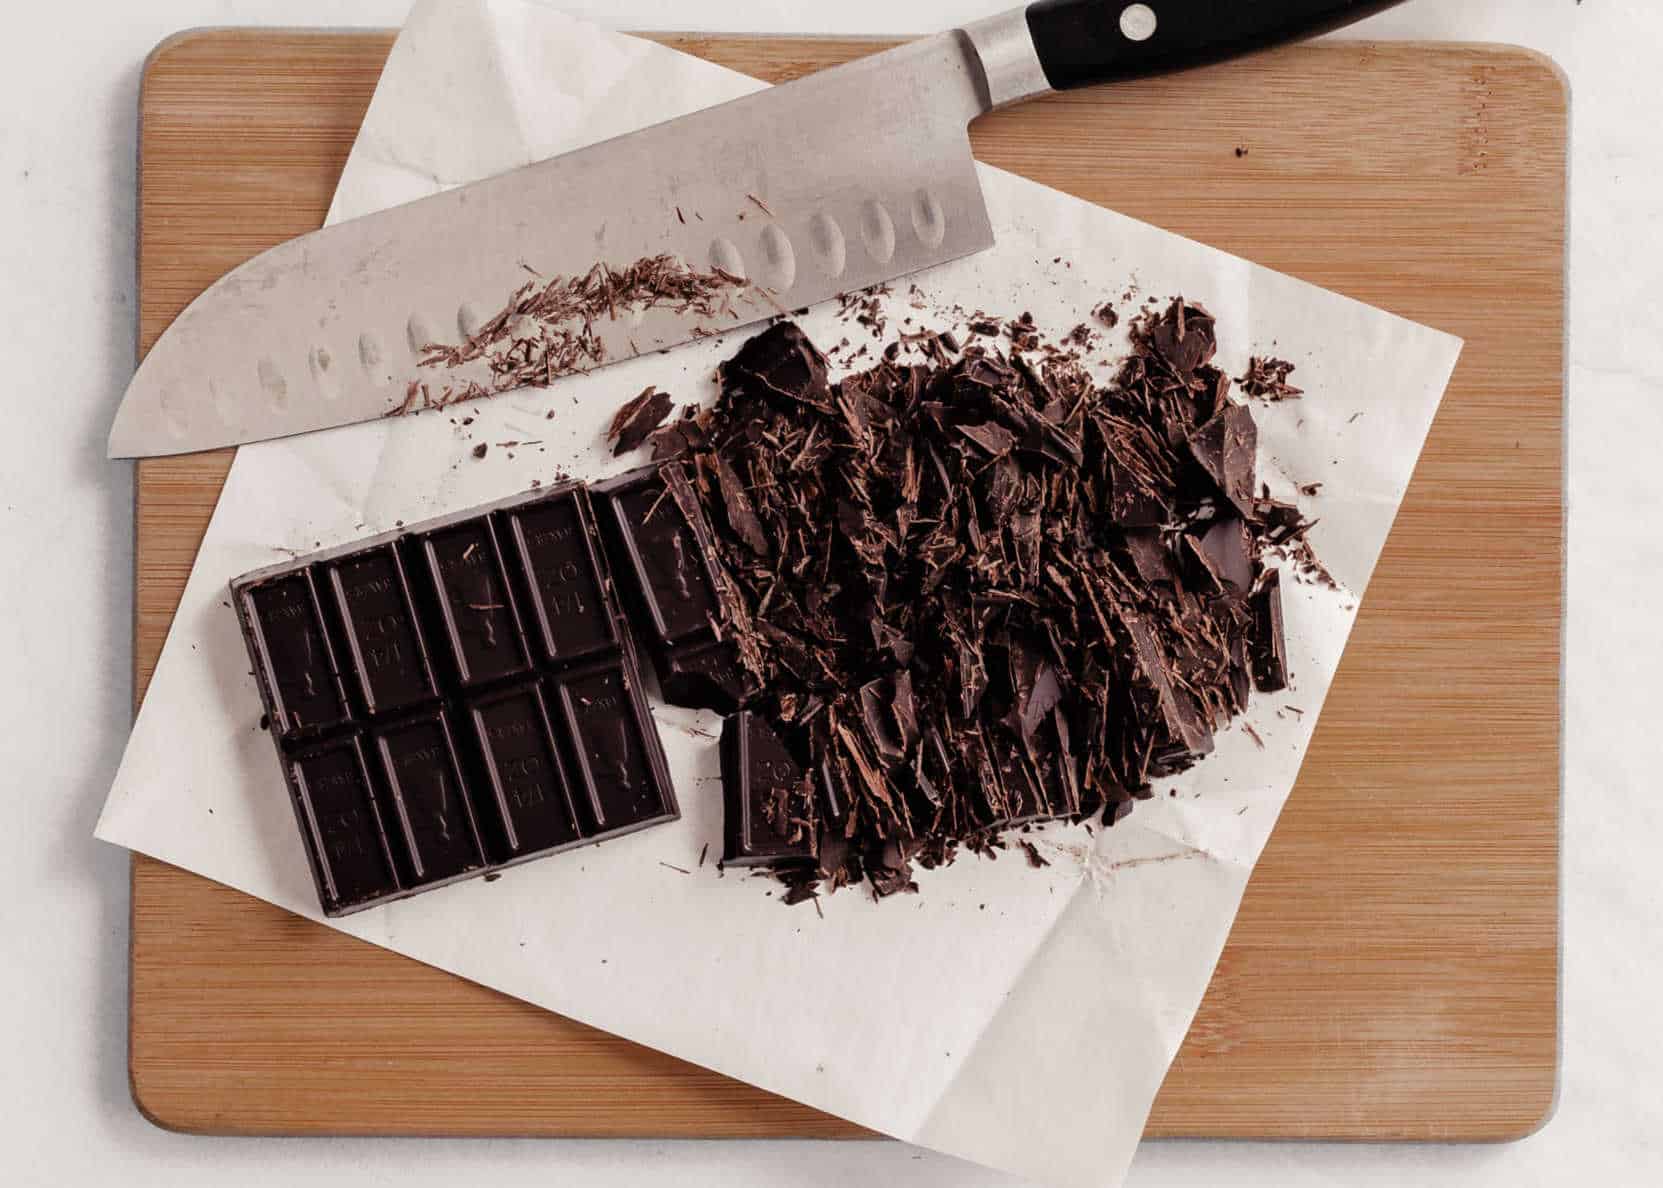 baking chocolate bar on wood board, chopped up with big knife.